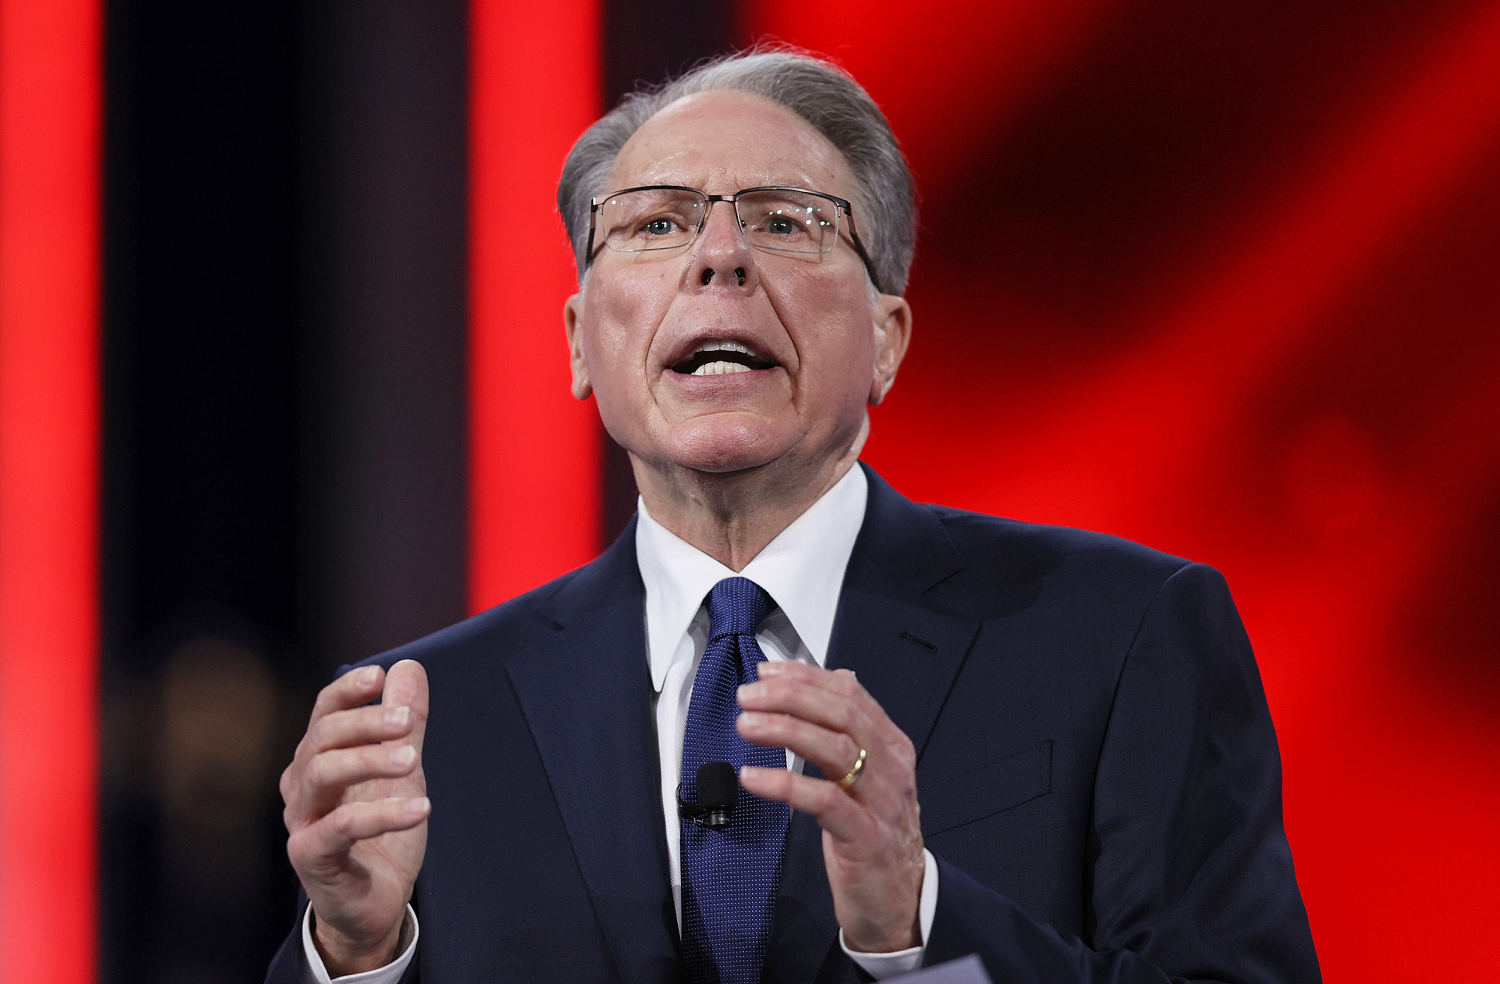 Wayne LaPierre resigns as NRA CEO after more than 30 years